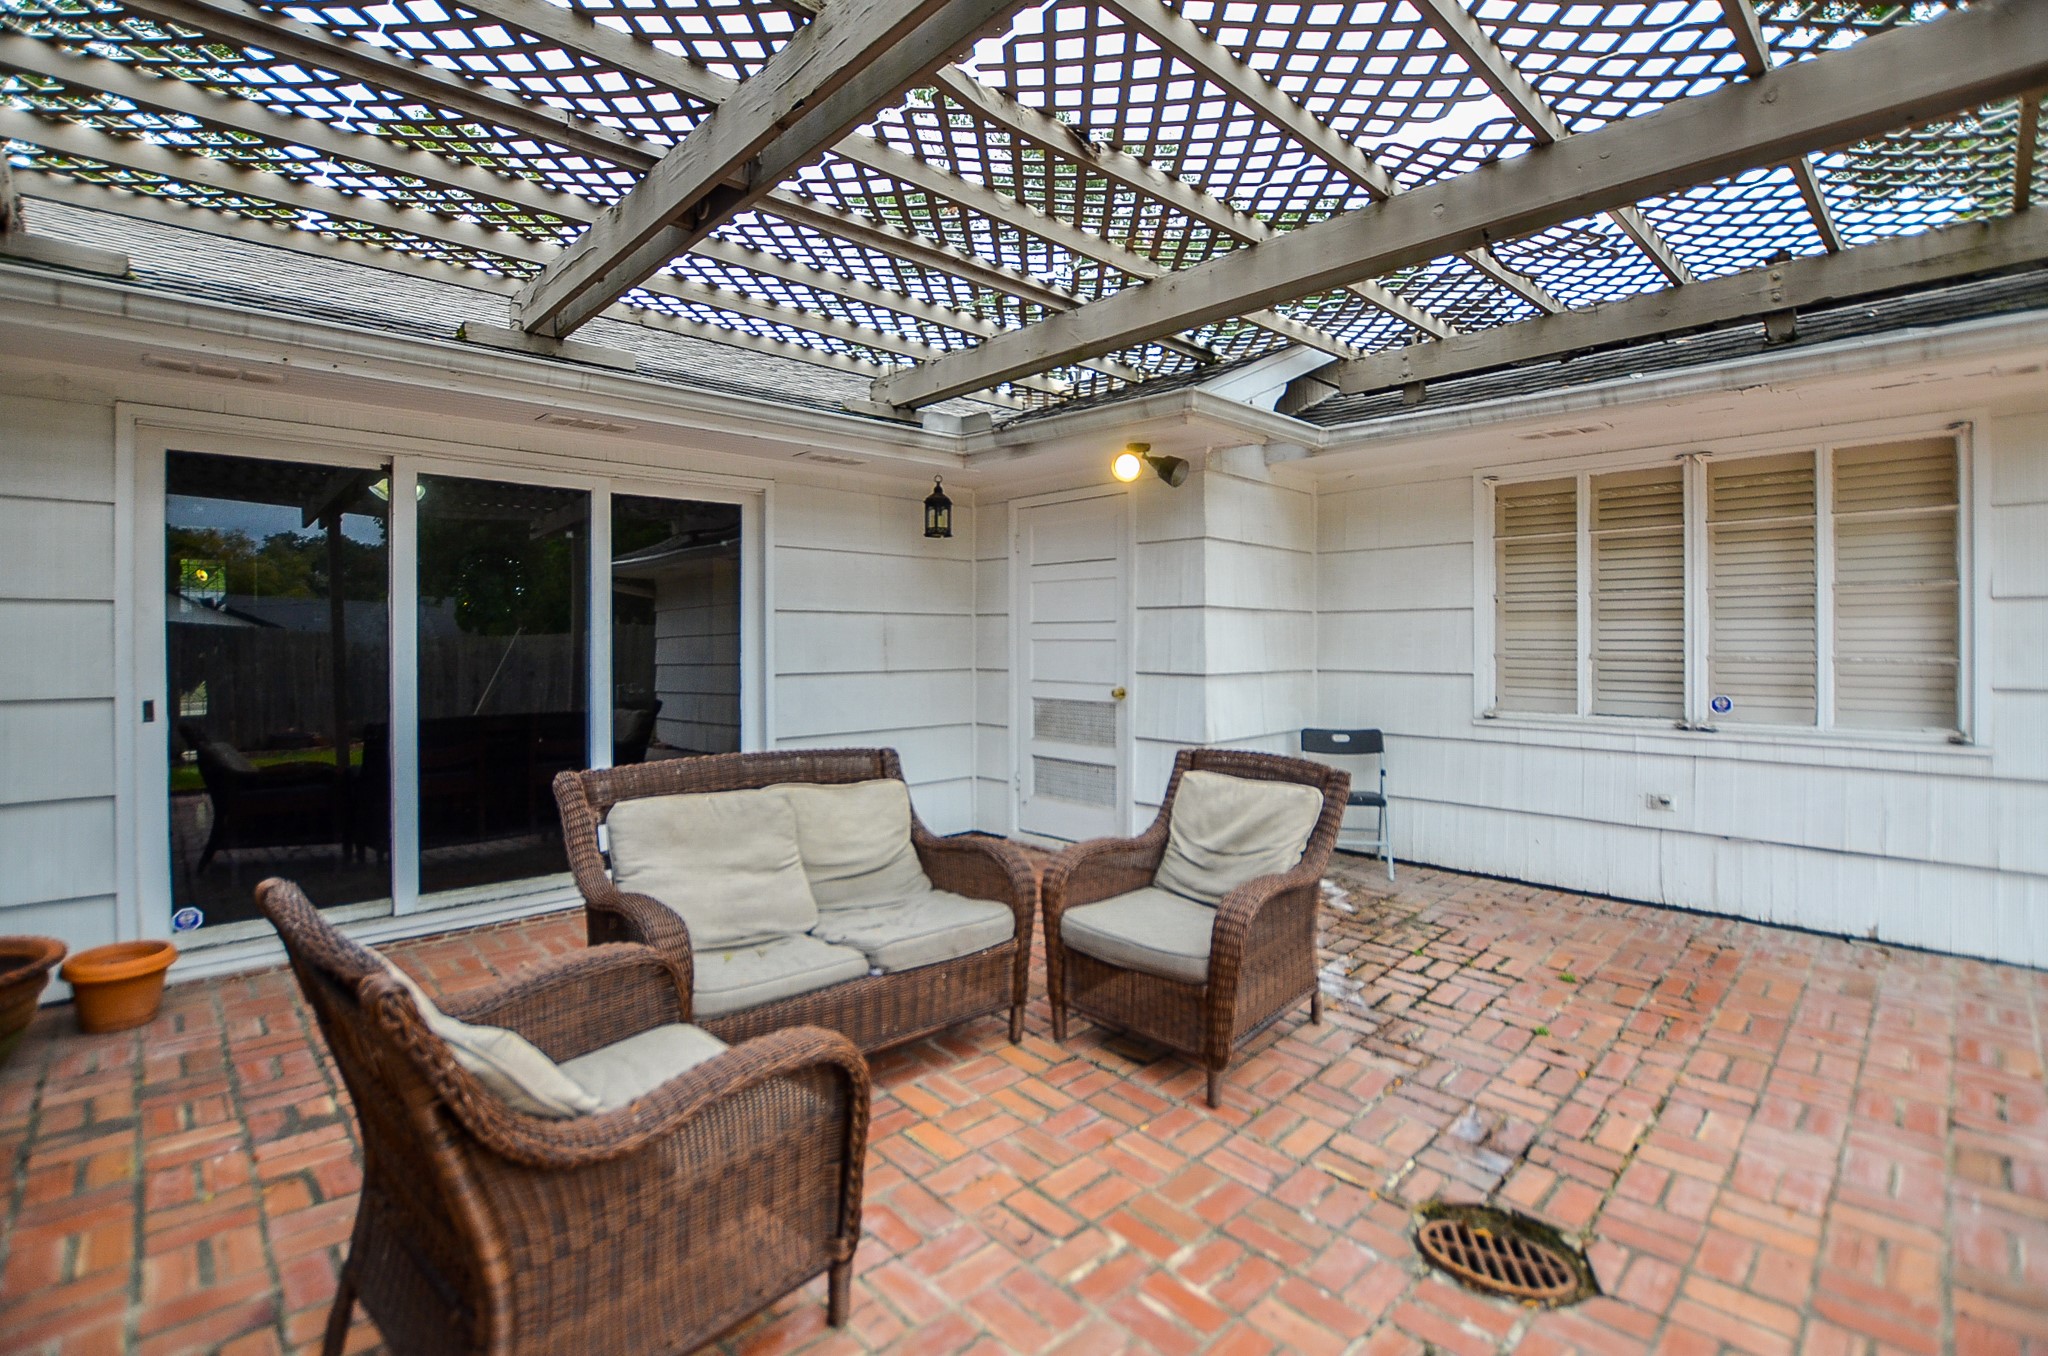 Your spacious covered patio embraces brick paved floor and gorgeous pergola accents, above!